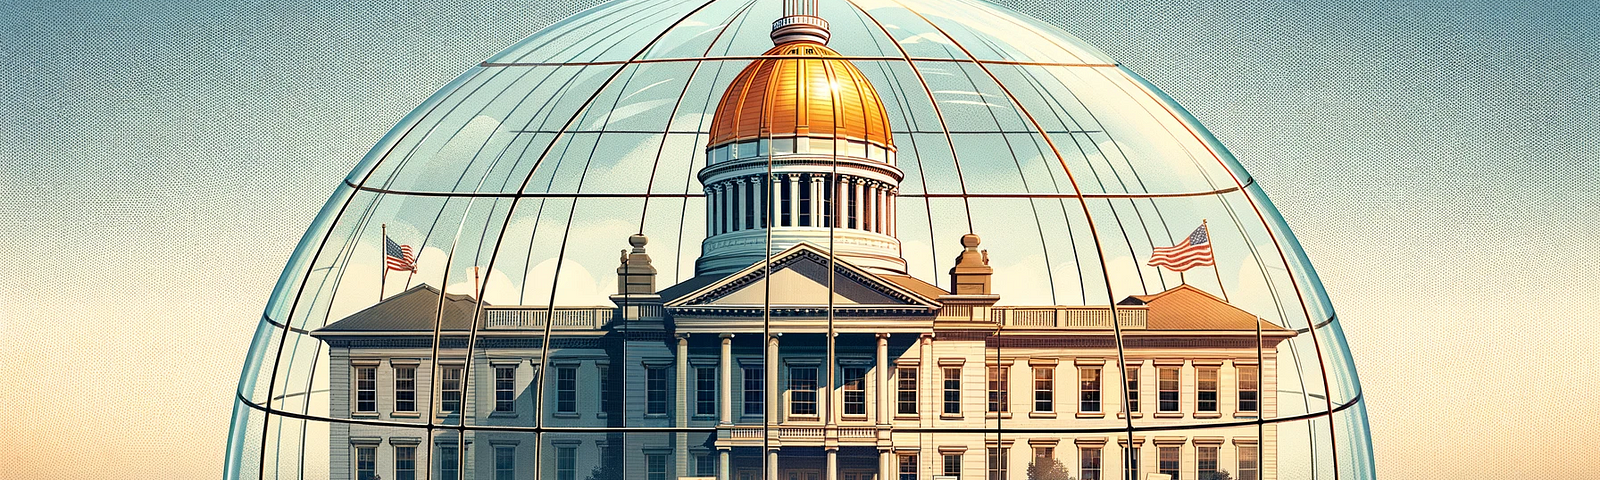 Illustration of a neoclassical building resembling the Trenton Statehouse, enclosed in a transparent dome. The dome houses a circular platform where a diverse group of individuals engage in various activities, such as conversing, reading, and working on laptops. The golden dome of the building gleams under a clear sky, flanked by two American flags.